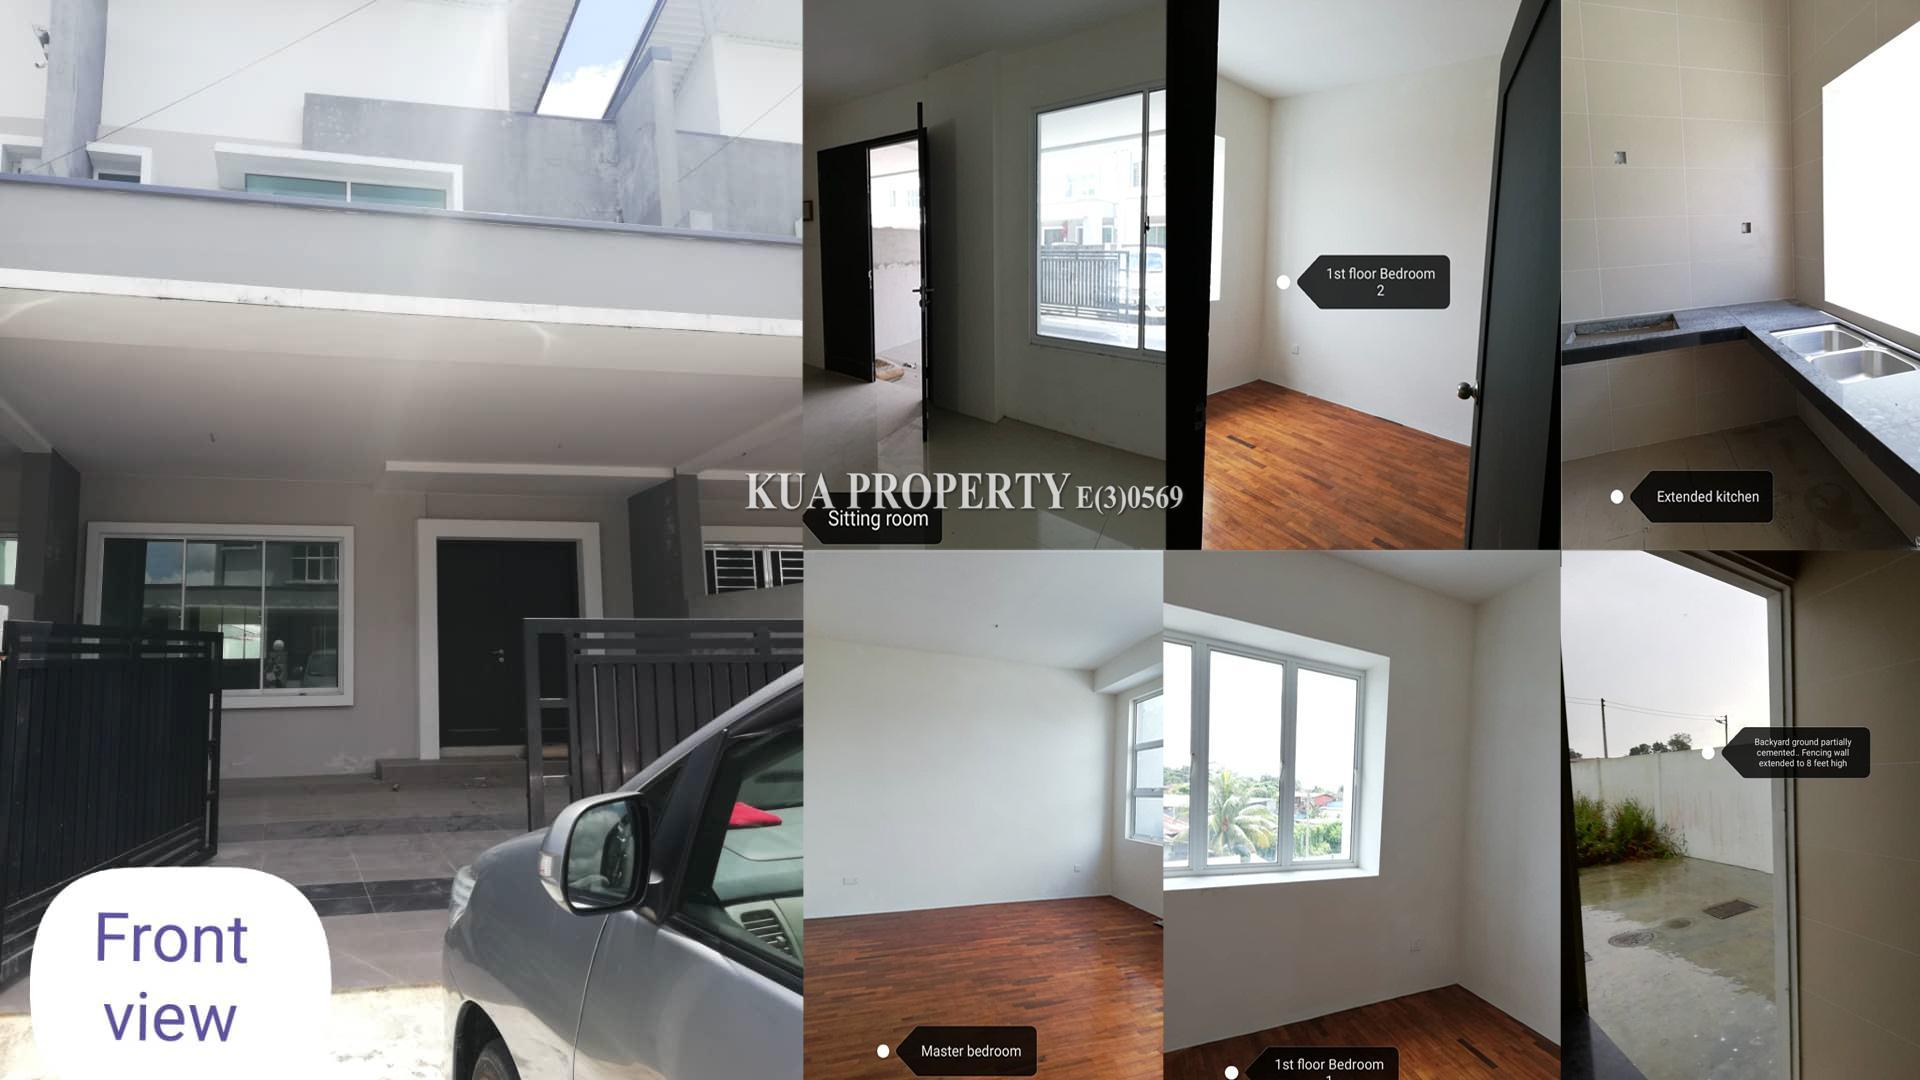 Double Storey Terrace House For Sale! Located at Kung Phin Park, Jalan Kong Ping